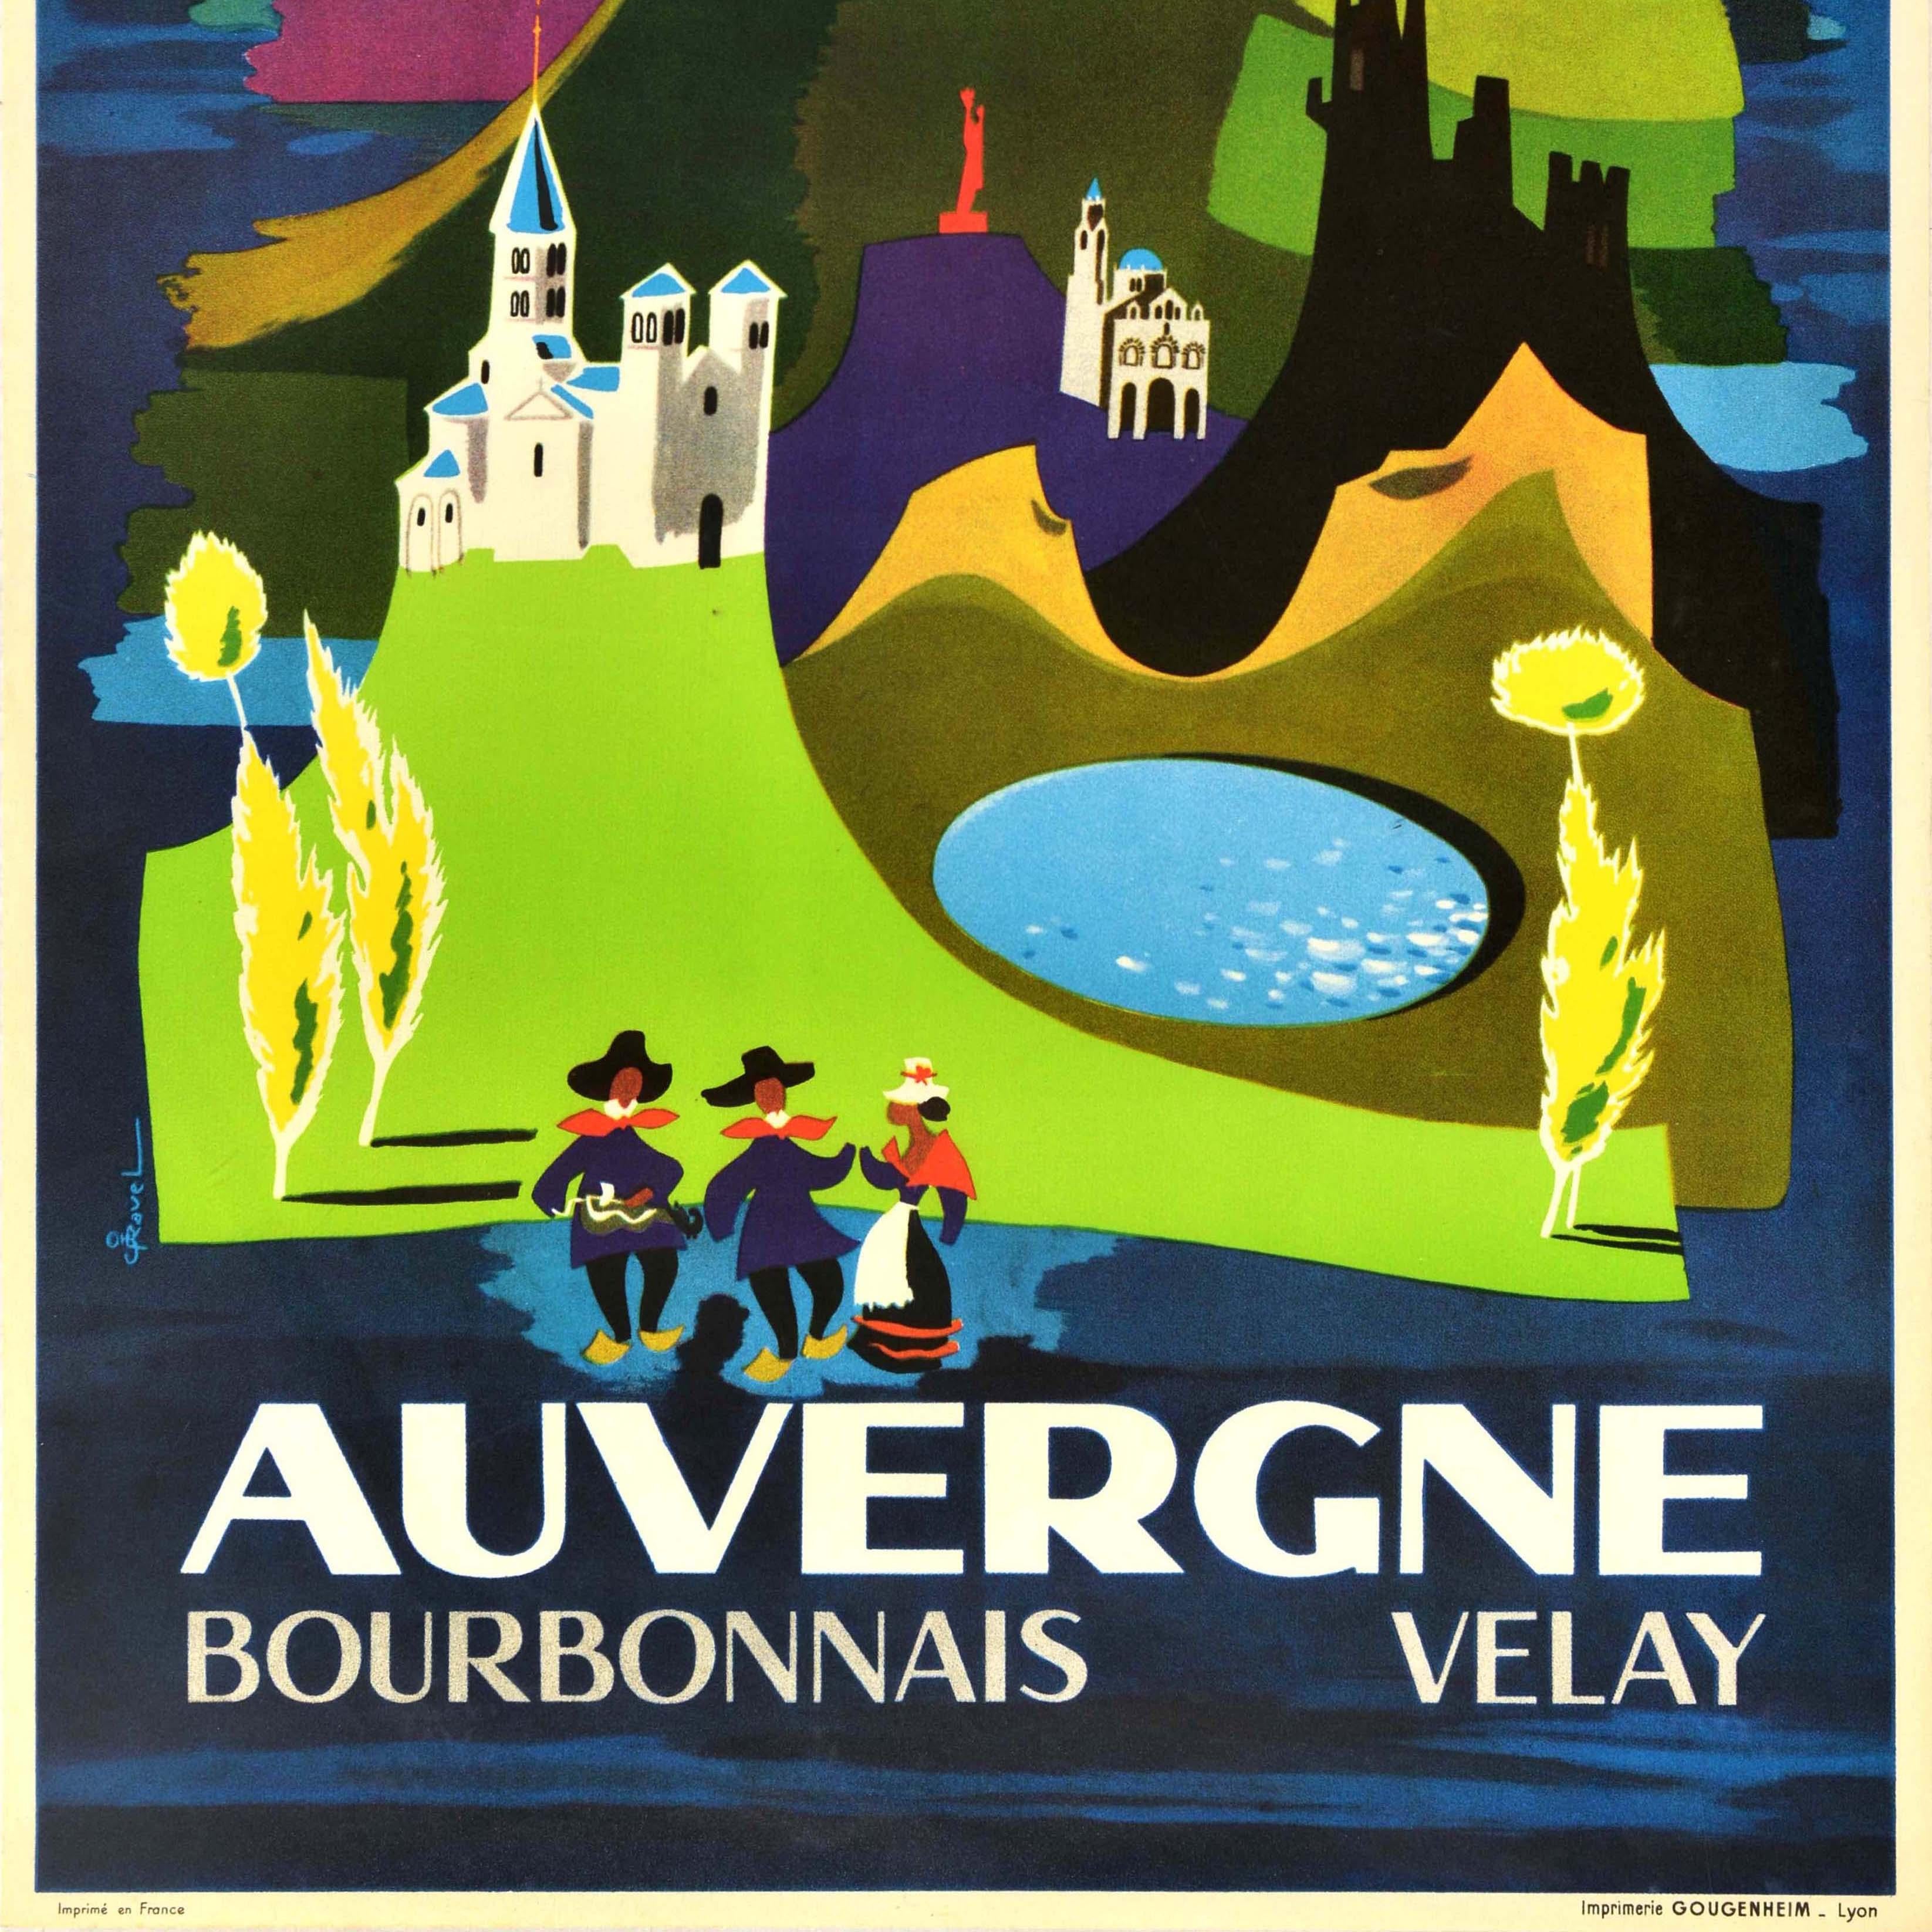 Original vintage travel poster - Your holiday Auvergne Bourbonnais Velay / Vos vacances Auvergne Bourbonnais Velay - featuring colourful illustrations of hills and mountains with historic castles and churches, a lake and trees on a blue background,